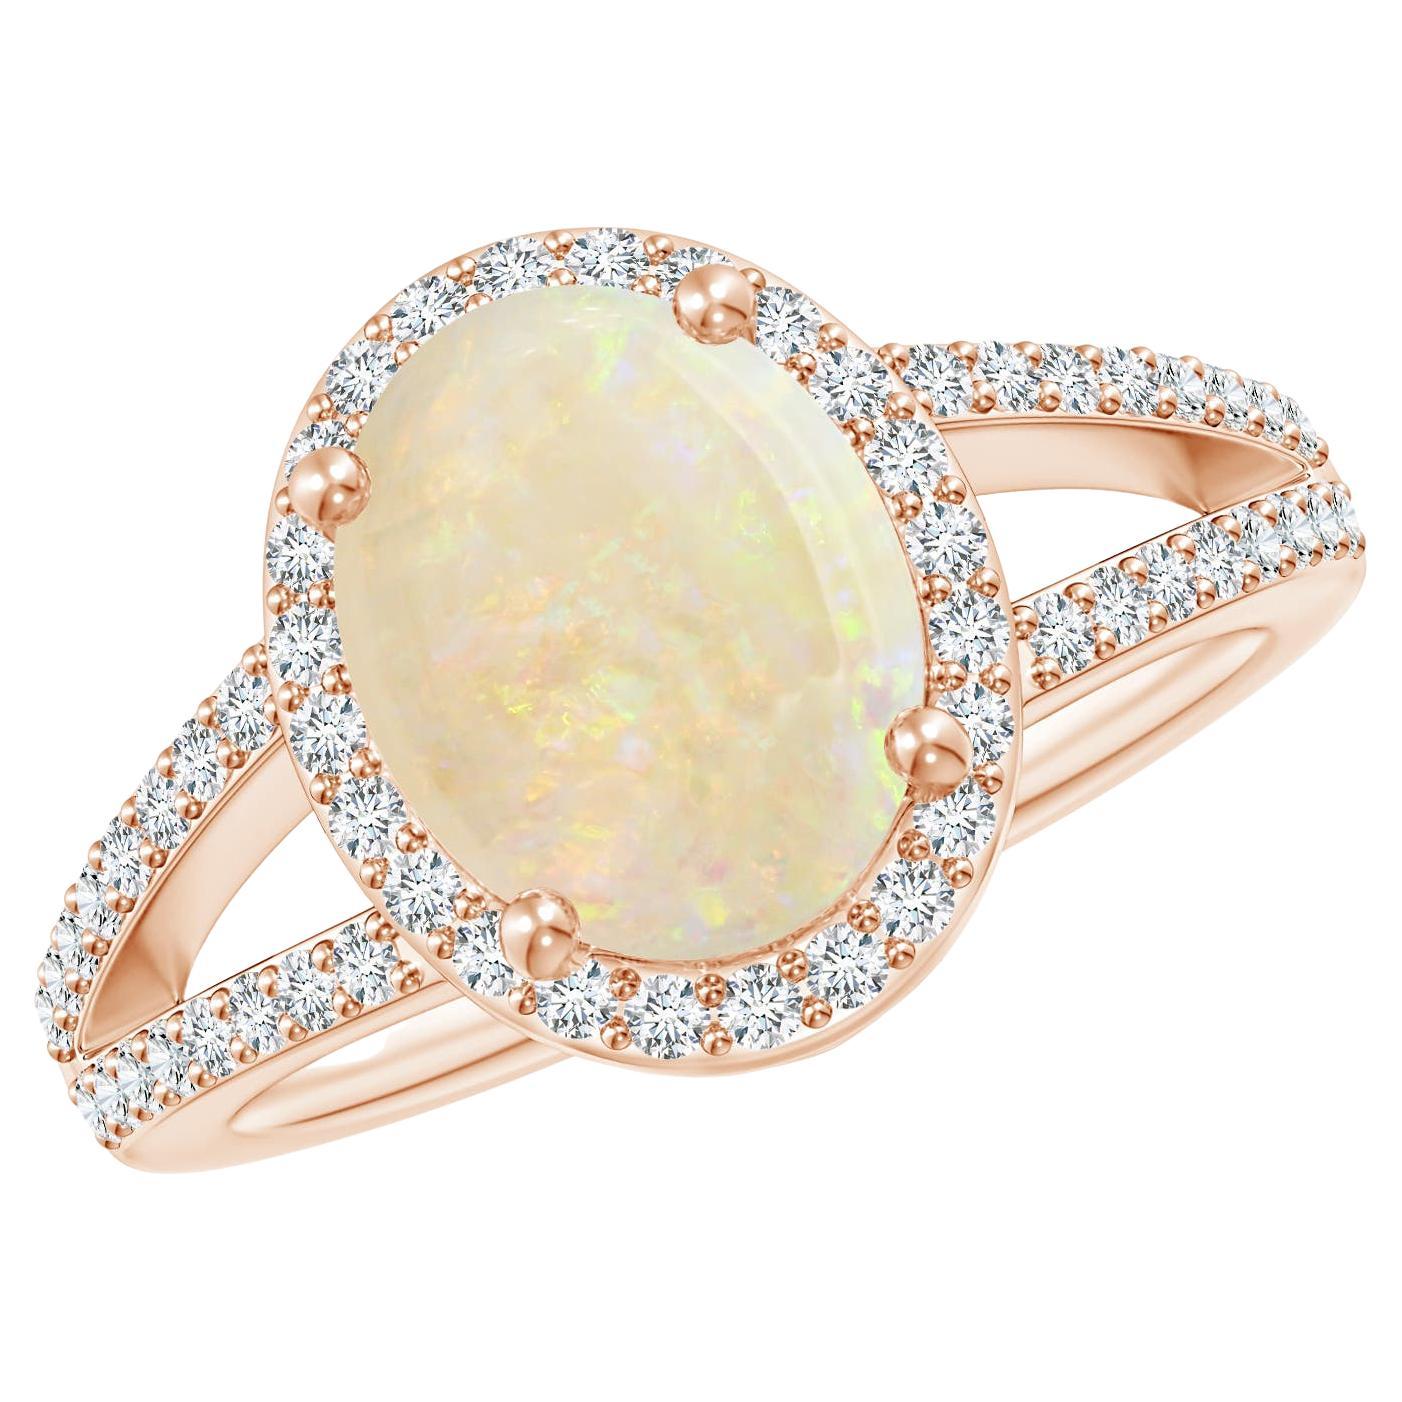 For Sale:  Angara Gia Certified Natural Opal Split Shank Halo Ring in Rose Gold